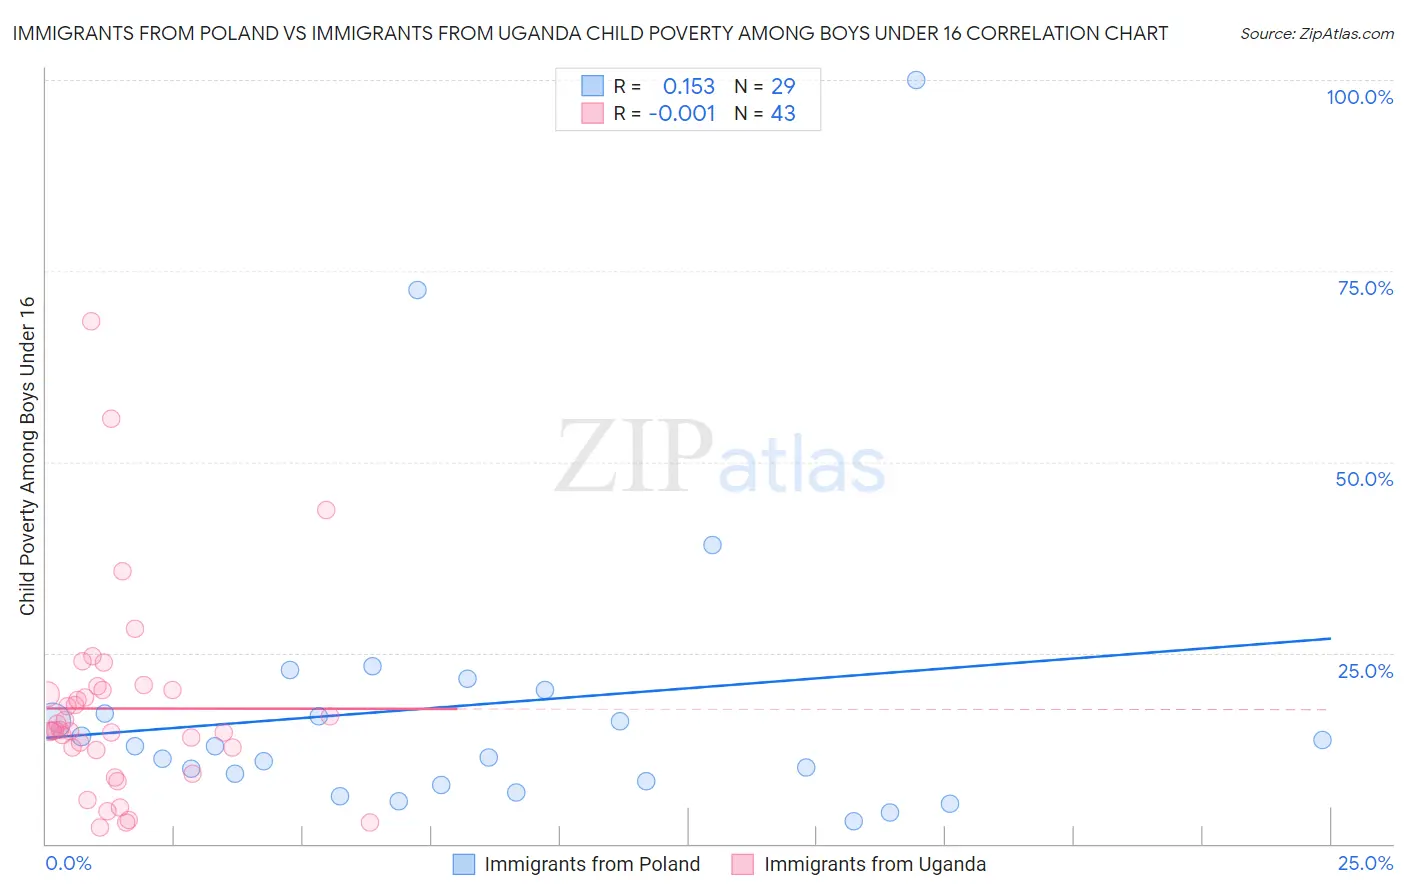 Immigrants from Poland vs Immigrants from Uganda Child Poverty Among Boys Under 16